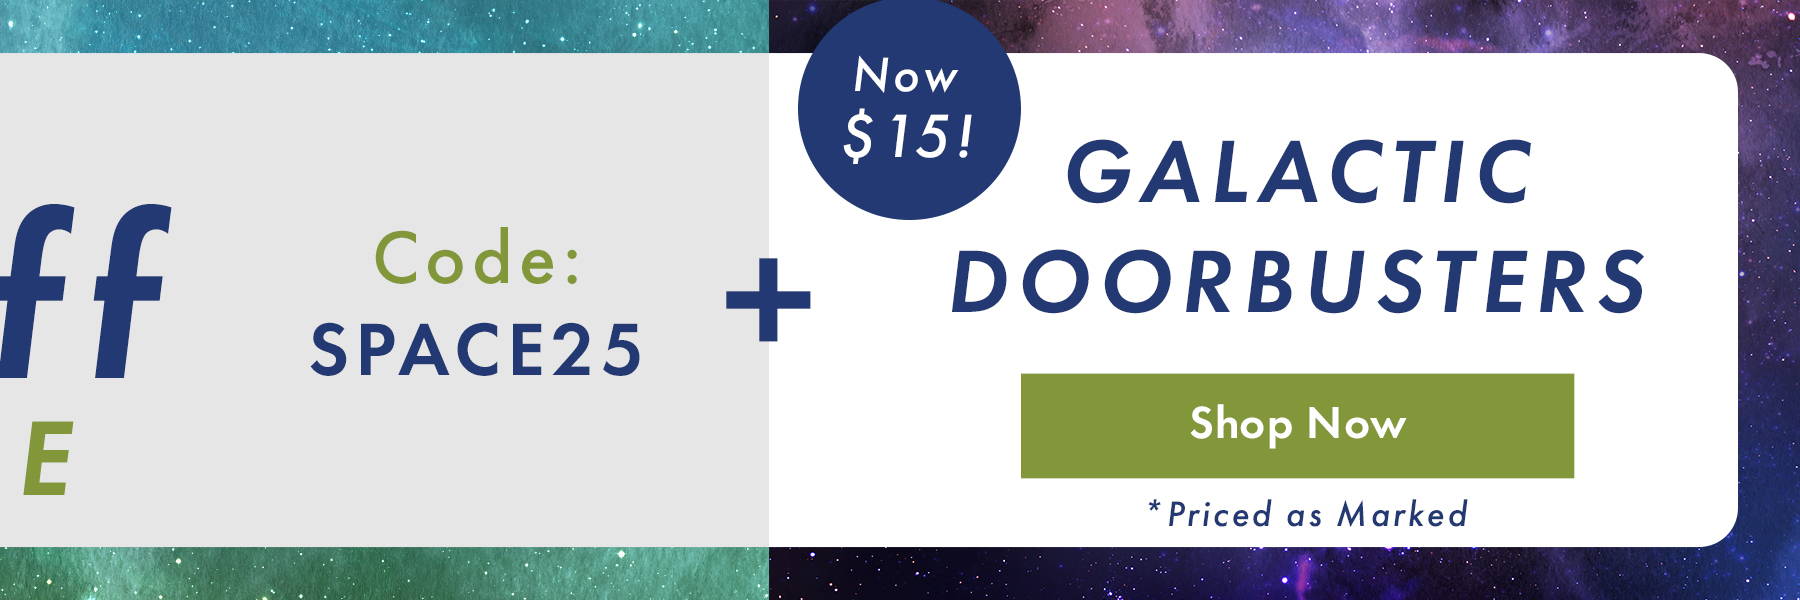 Galactic Doorbusters - Now $15 *Priced as Marked SHOP NOW